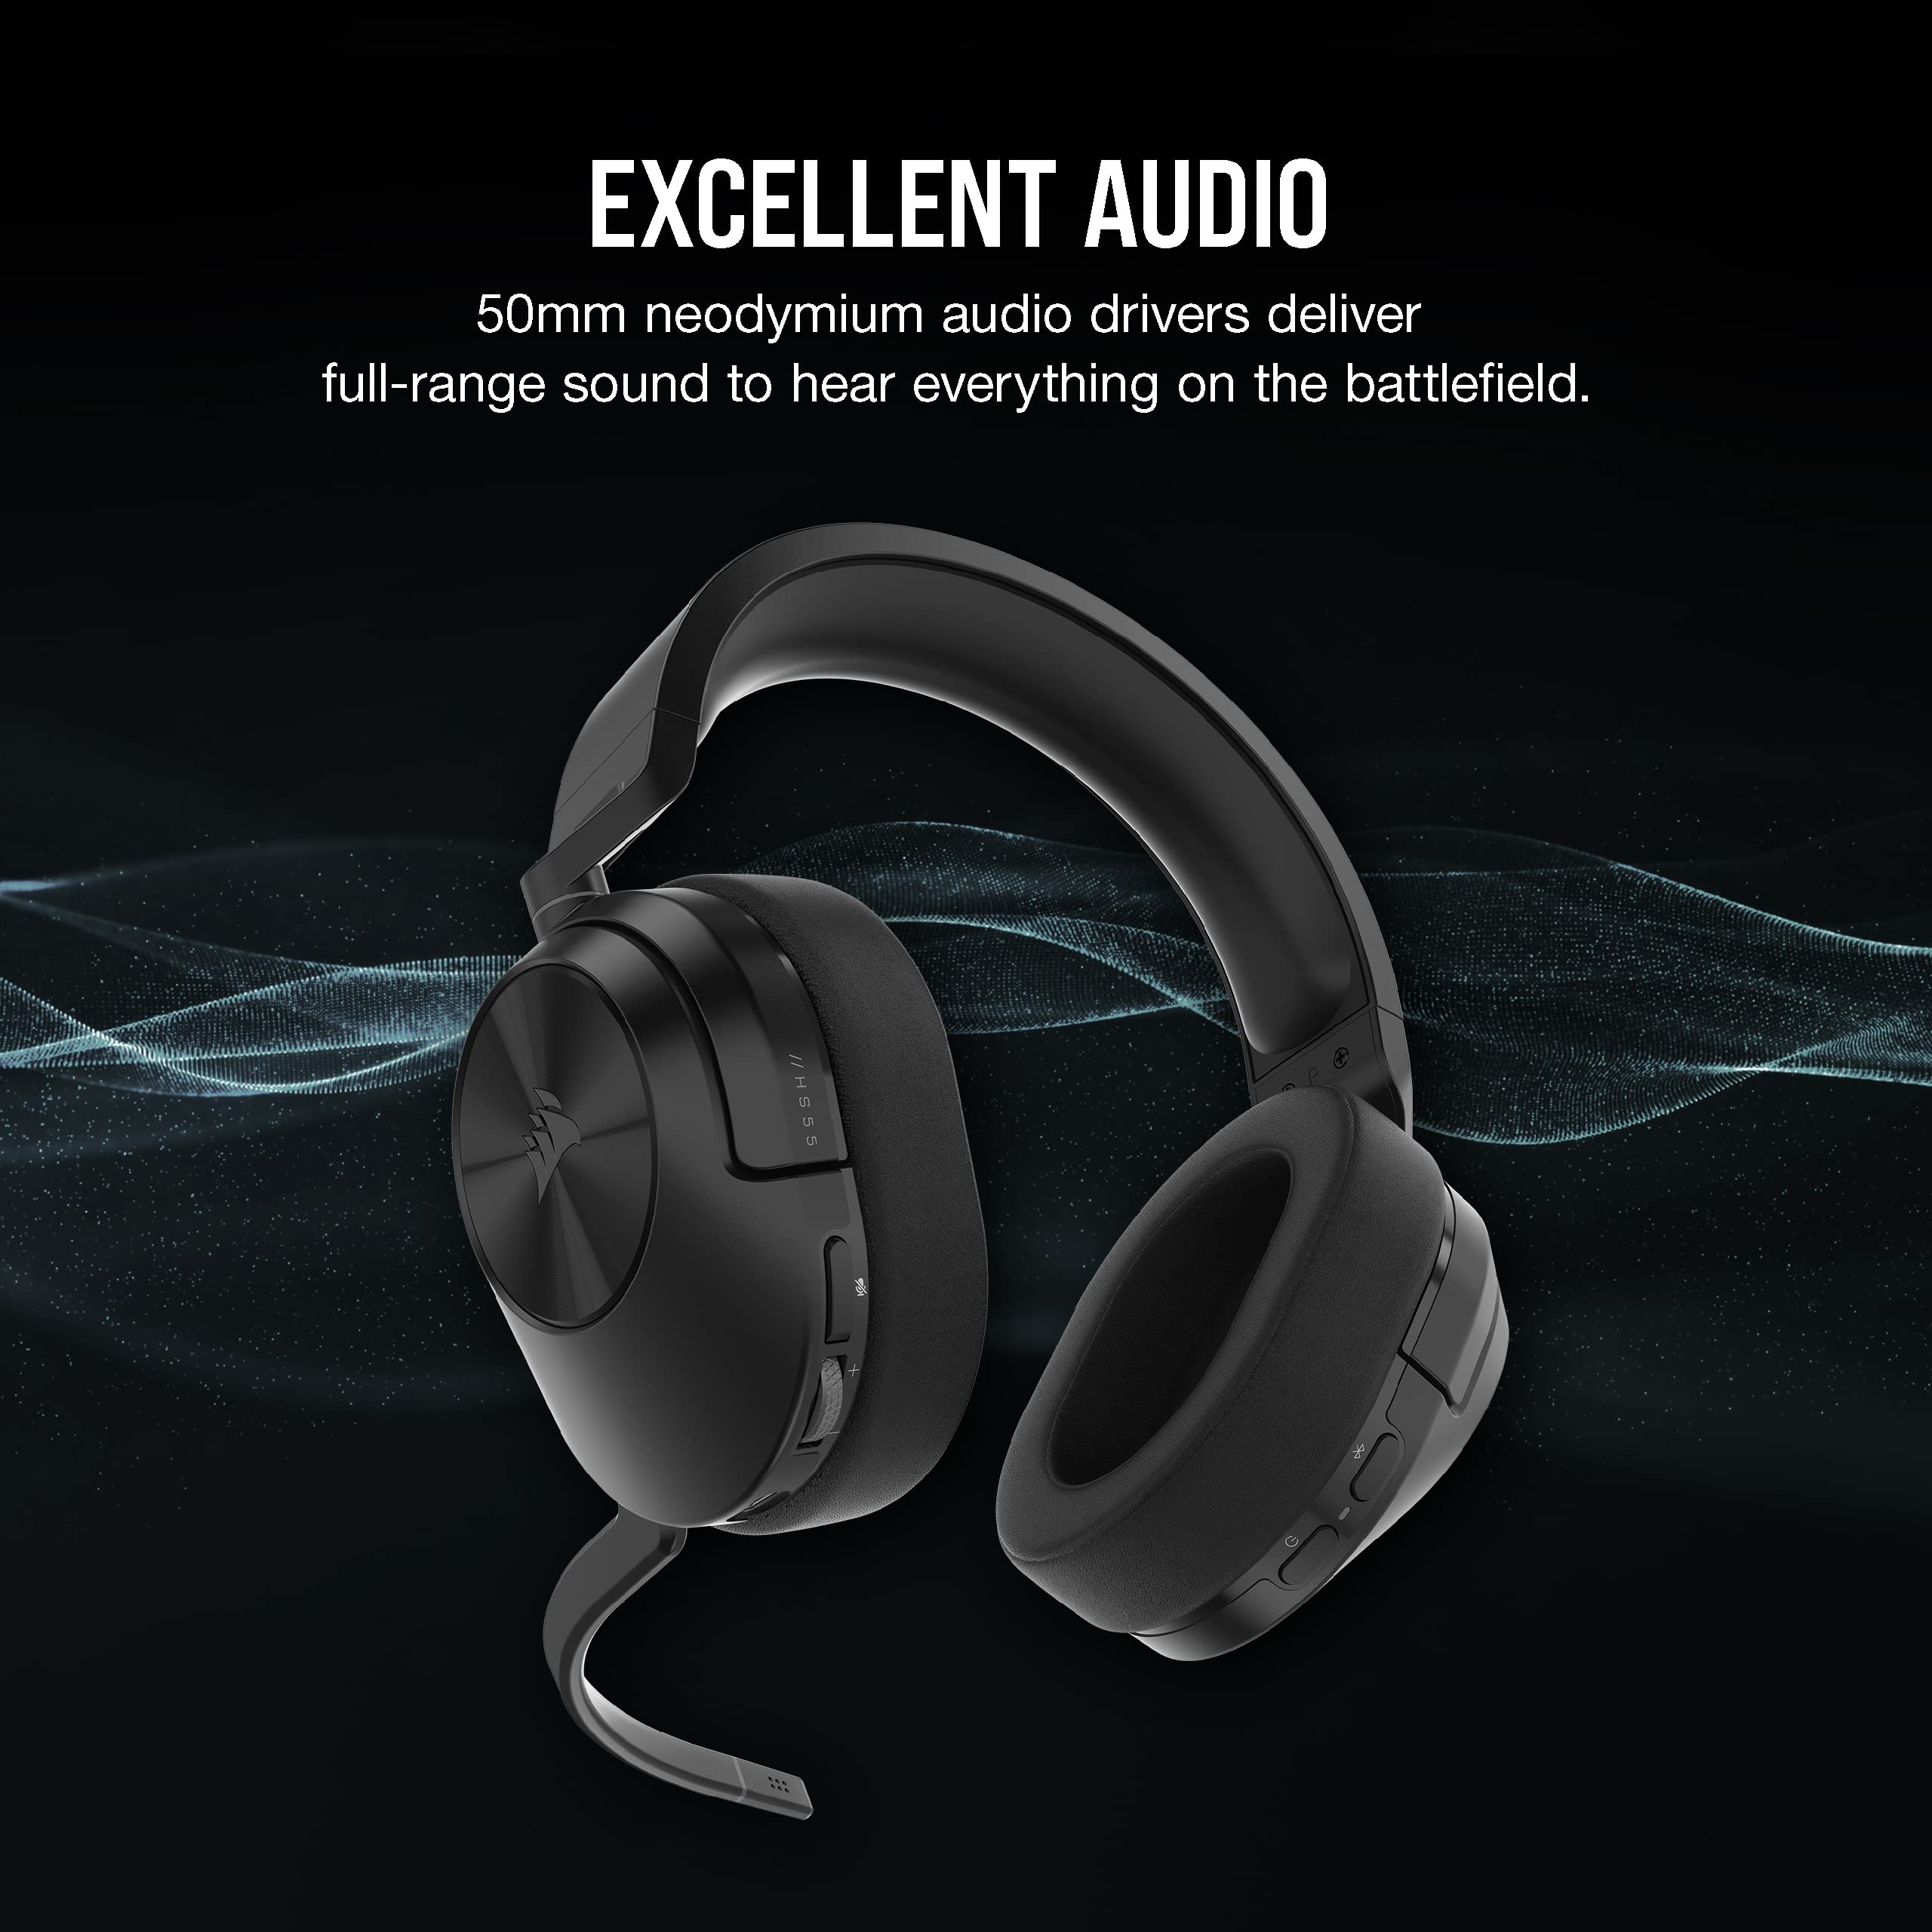 Corsair HS55 Wireless CORE Gaming Headset - Low-Latency 2.4Ghz, Up to 50ft Bluetooth Range, Lightweight Construction, Tempest 3D AudioTech Support on PS5, Omni-Directional Microphone - Black